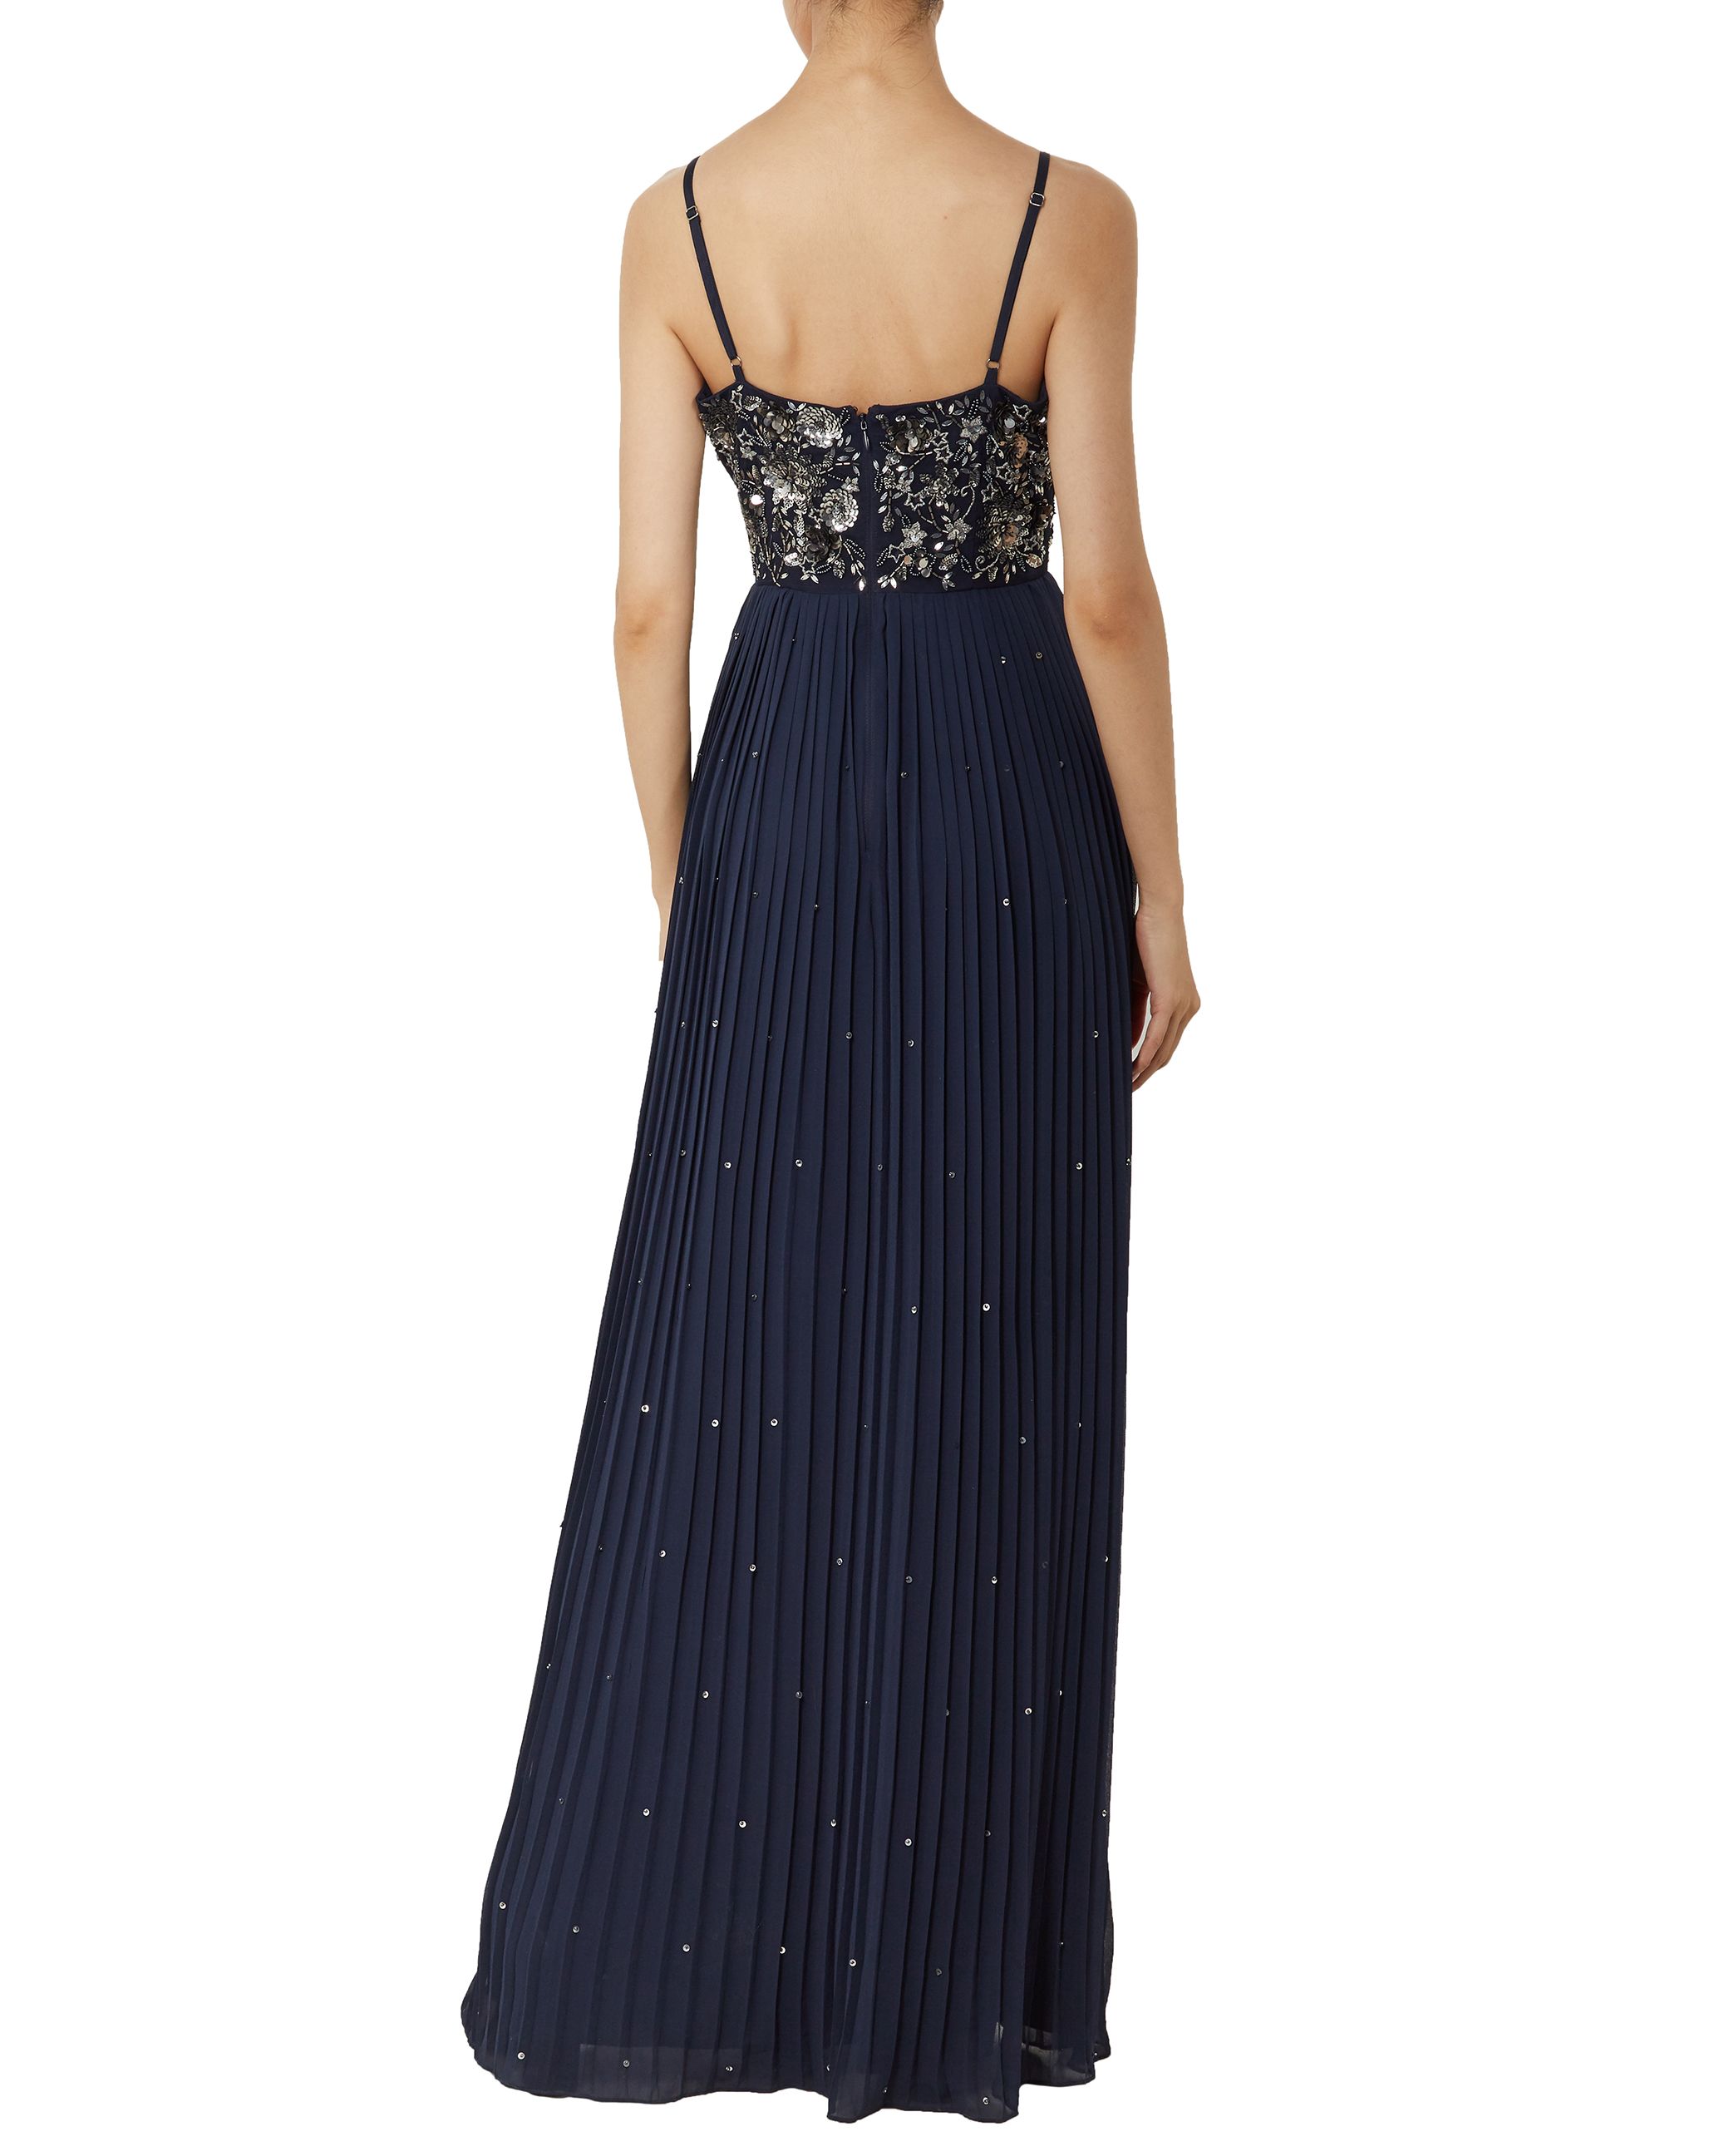 Strappy Embellished Maxi Dress